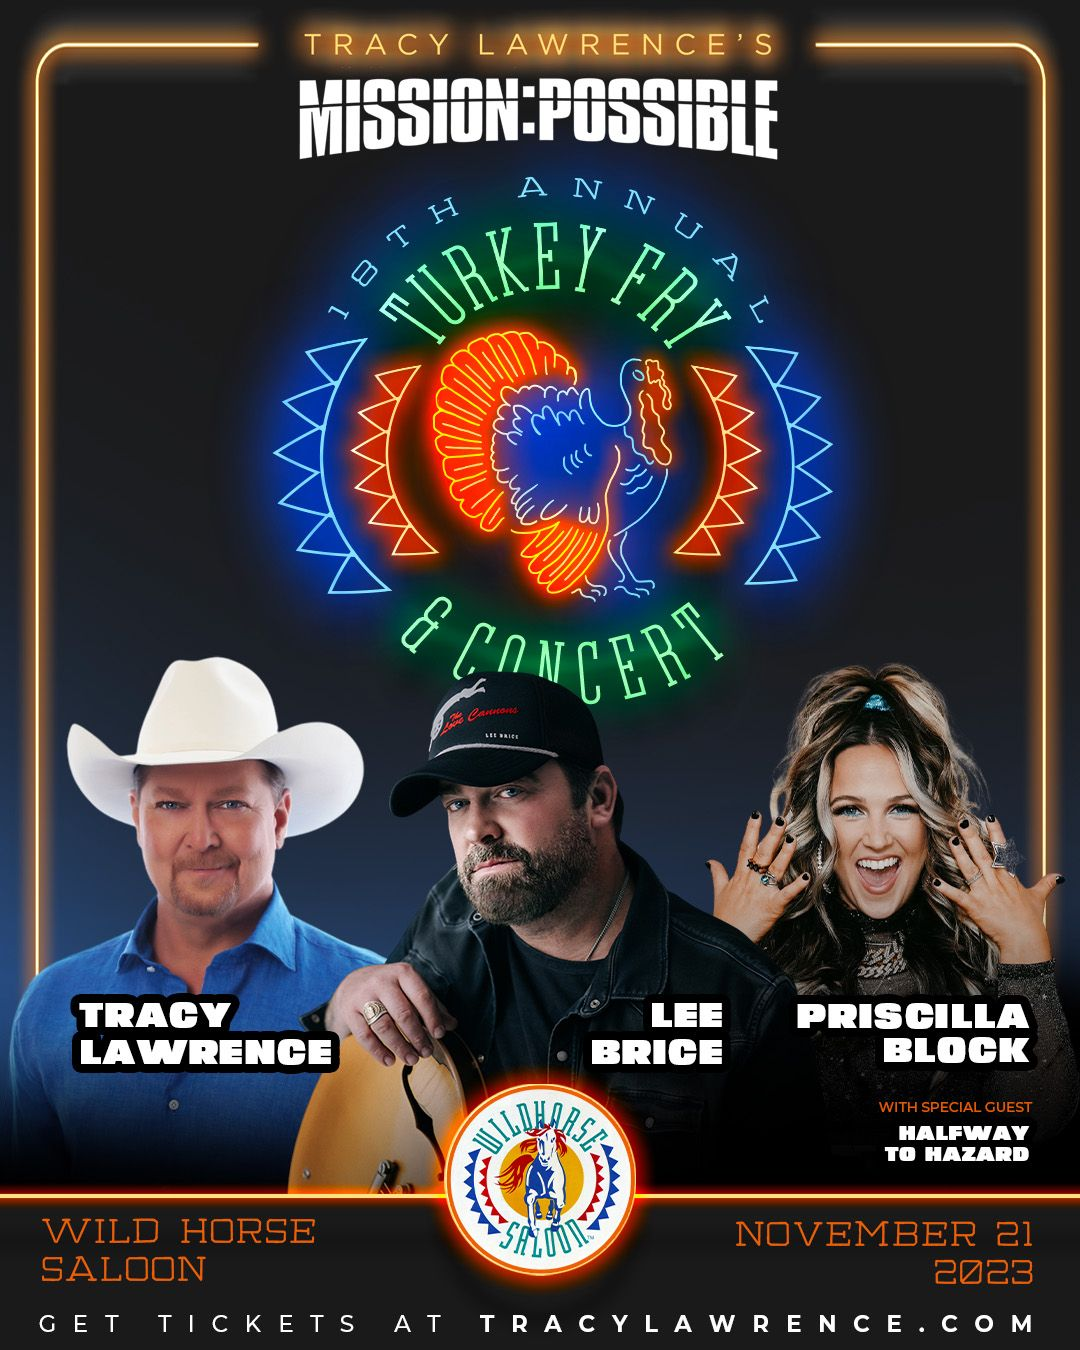 TRACY LAWRENCE ANNOUNCES 18TH ANNUAL MISSION:POSSIBLE TURKEY FRY AND BENEFIT CONCERT WITH LEE BRICE, PRISCILLA BLOCK AND HALFWAY TO HAZARD ON NOV. 21